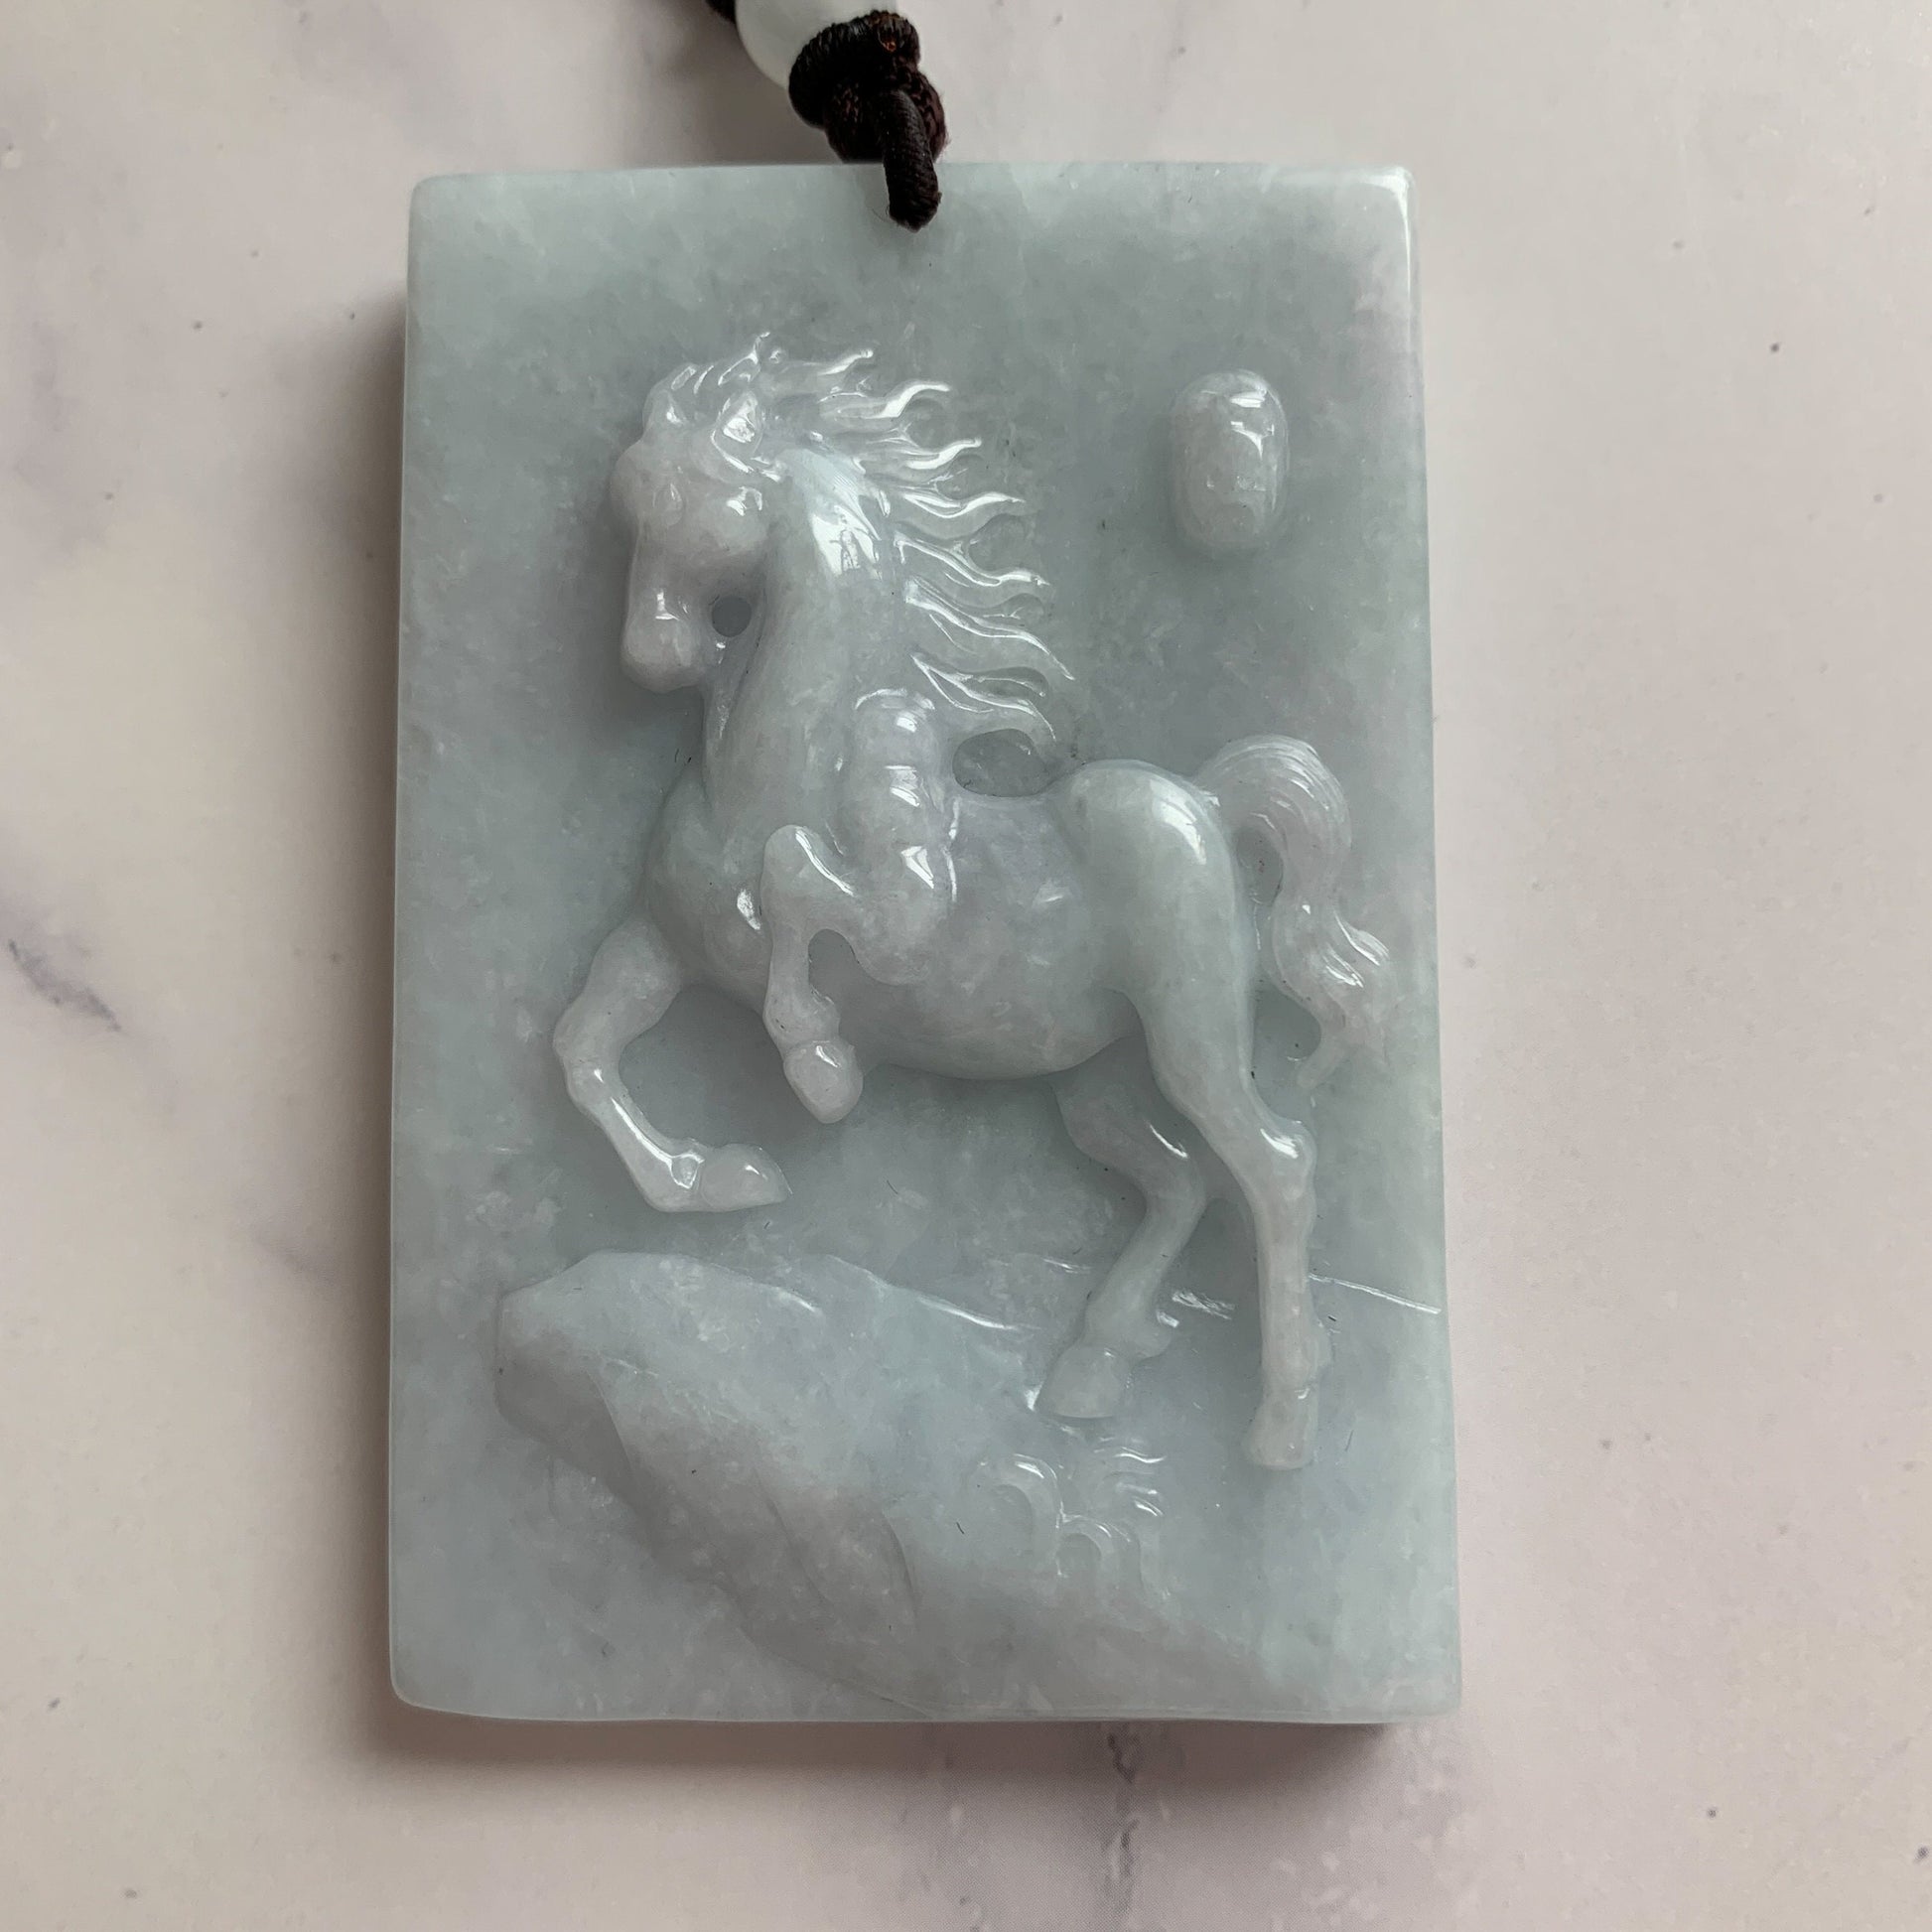 Large Horse Jade Jadeite Chinese Zodiac Carved Pendant Necklace, YJ-0321-0330675 - AriaDesignCollection